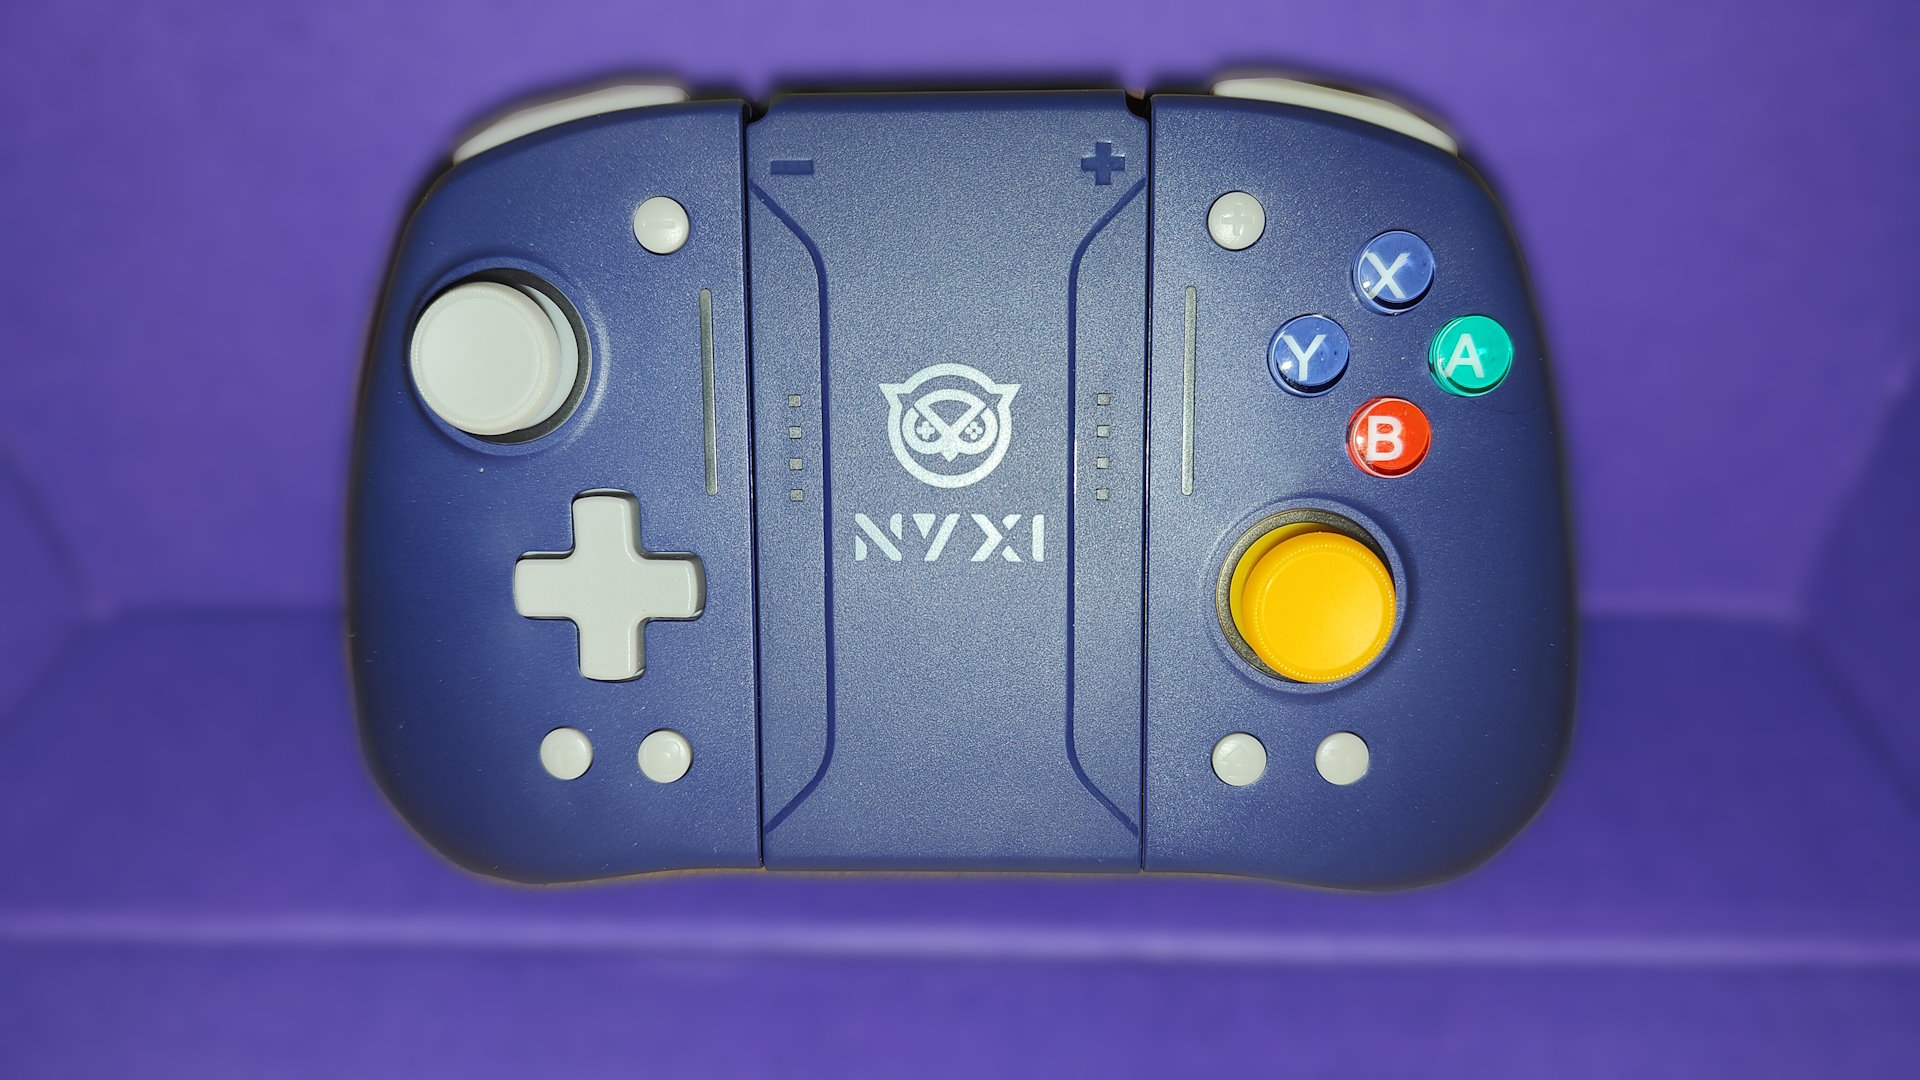 NYXI Hyperion Pro controller against a purple backdrop.